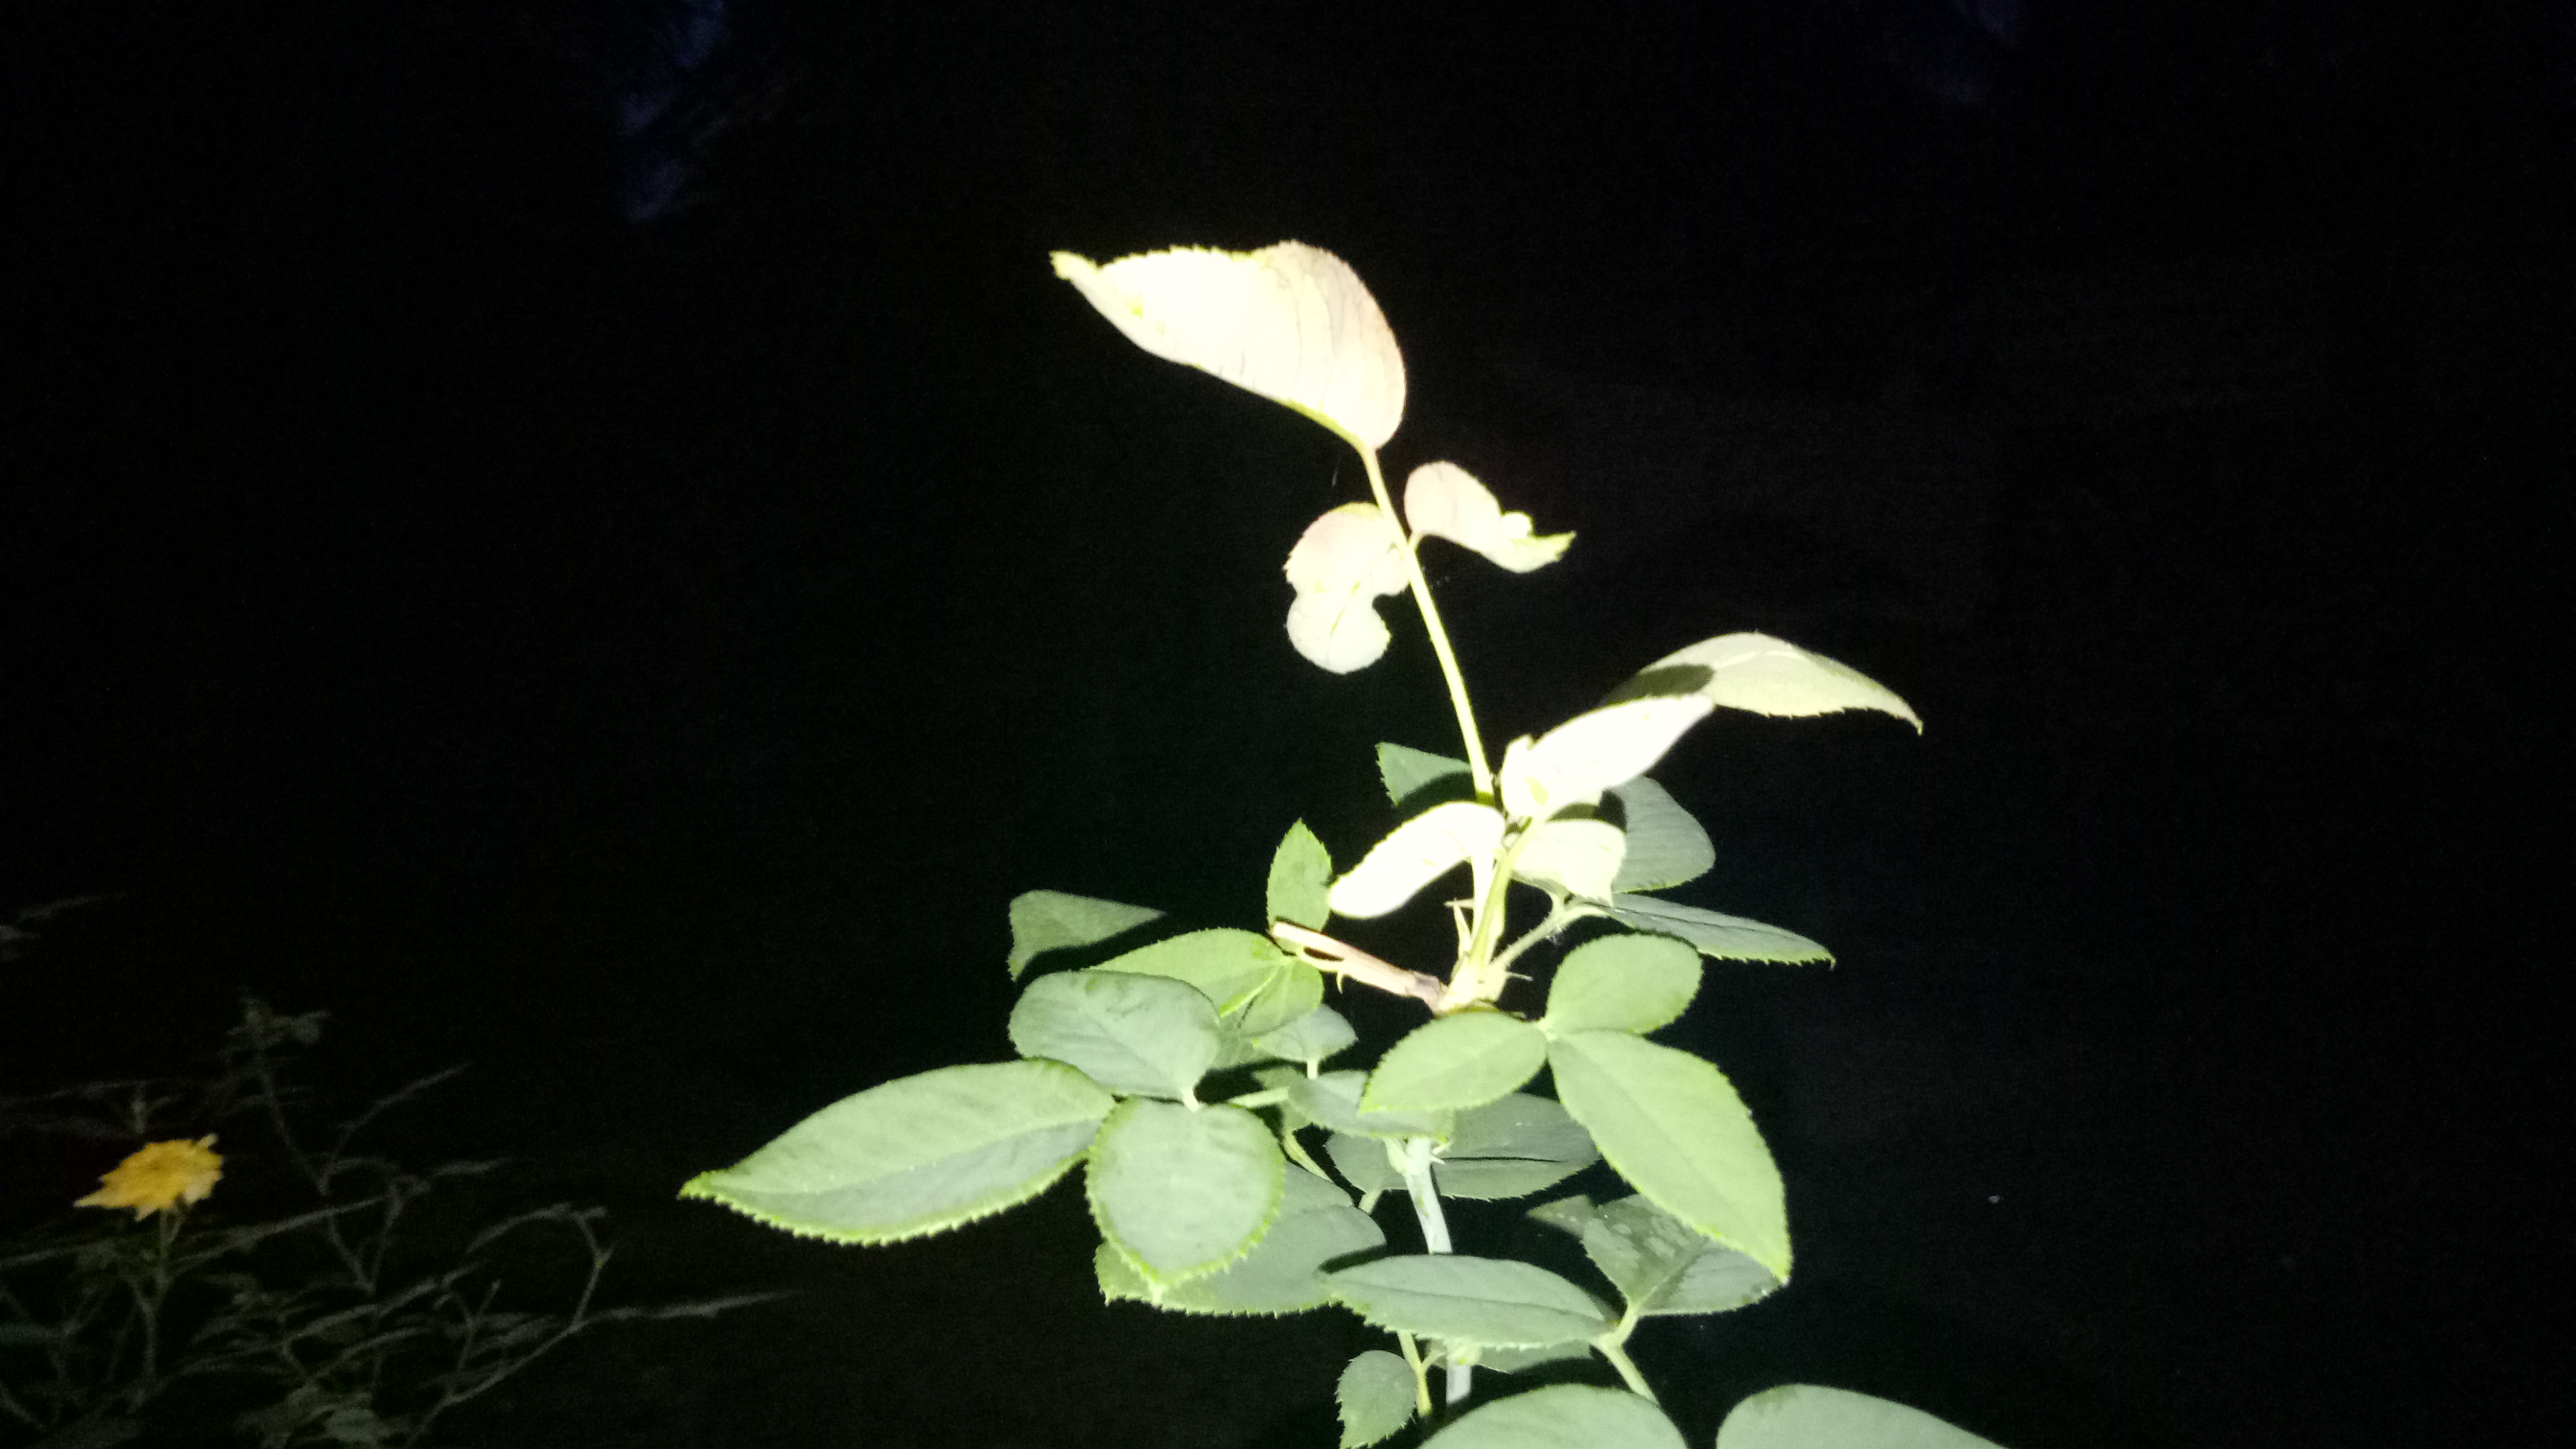 This is nt view rose leaf